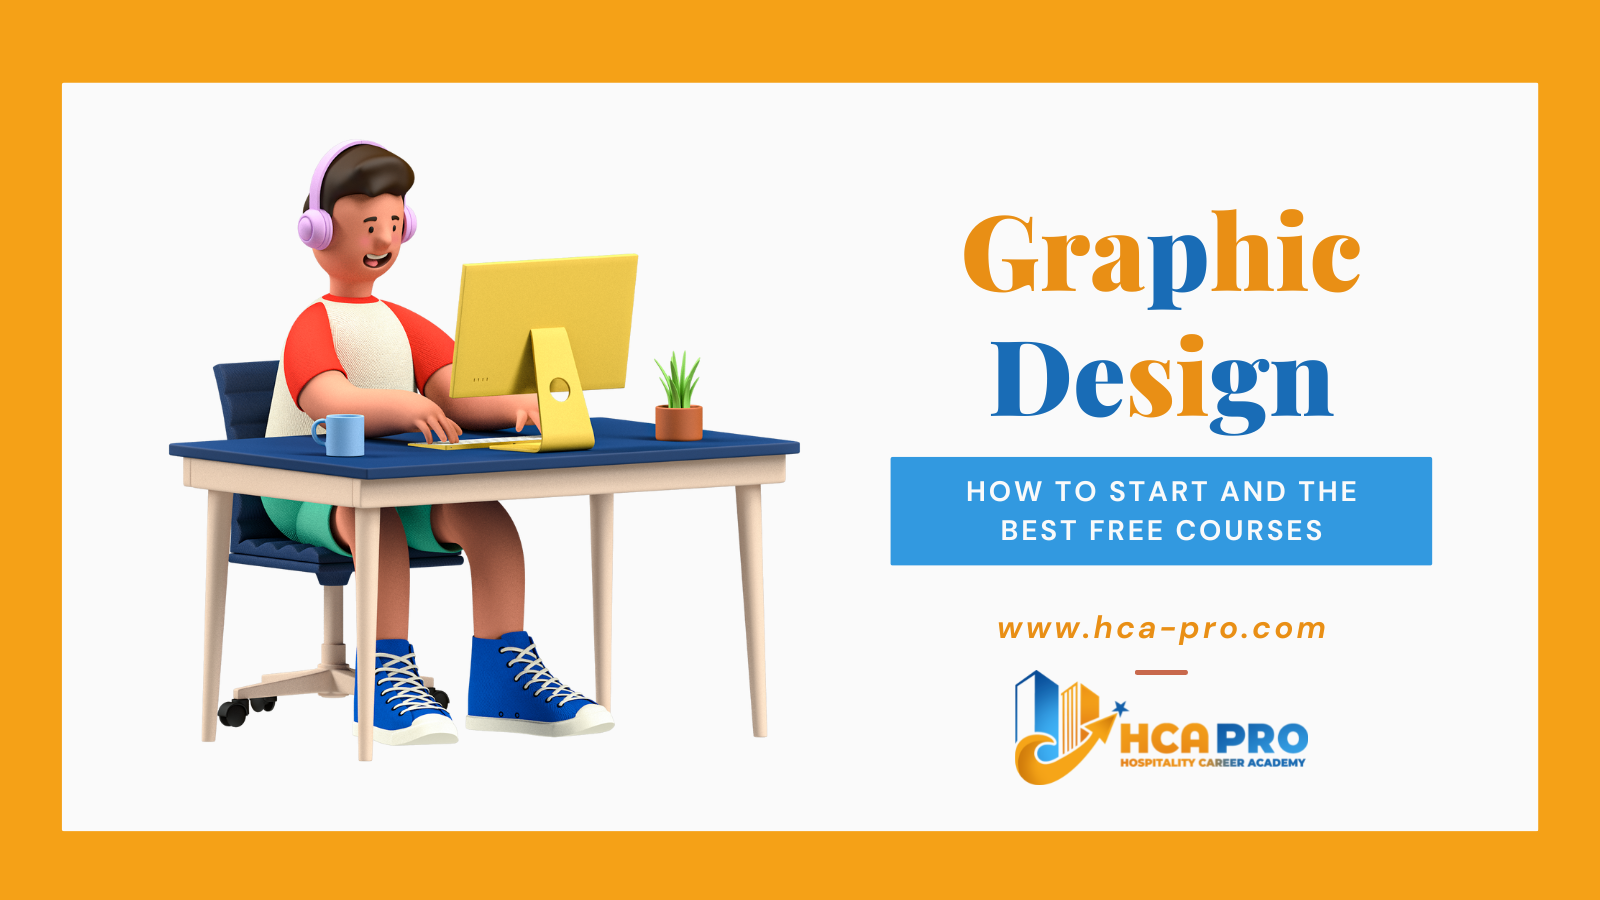 Graphic design is the art and practice of creating visual content to communicate information and ideas to a specific audience.